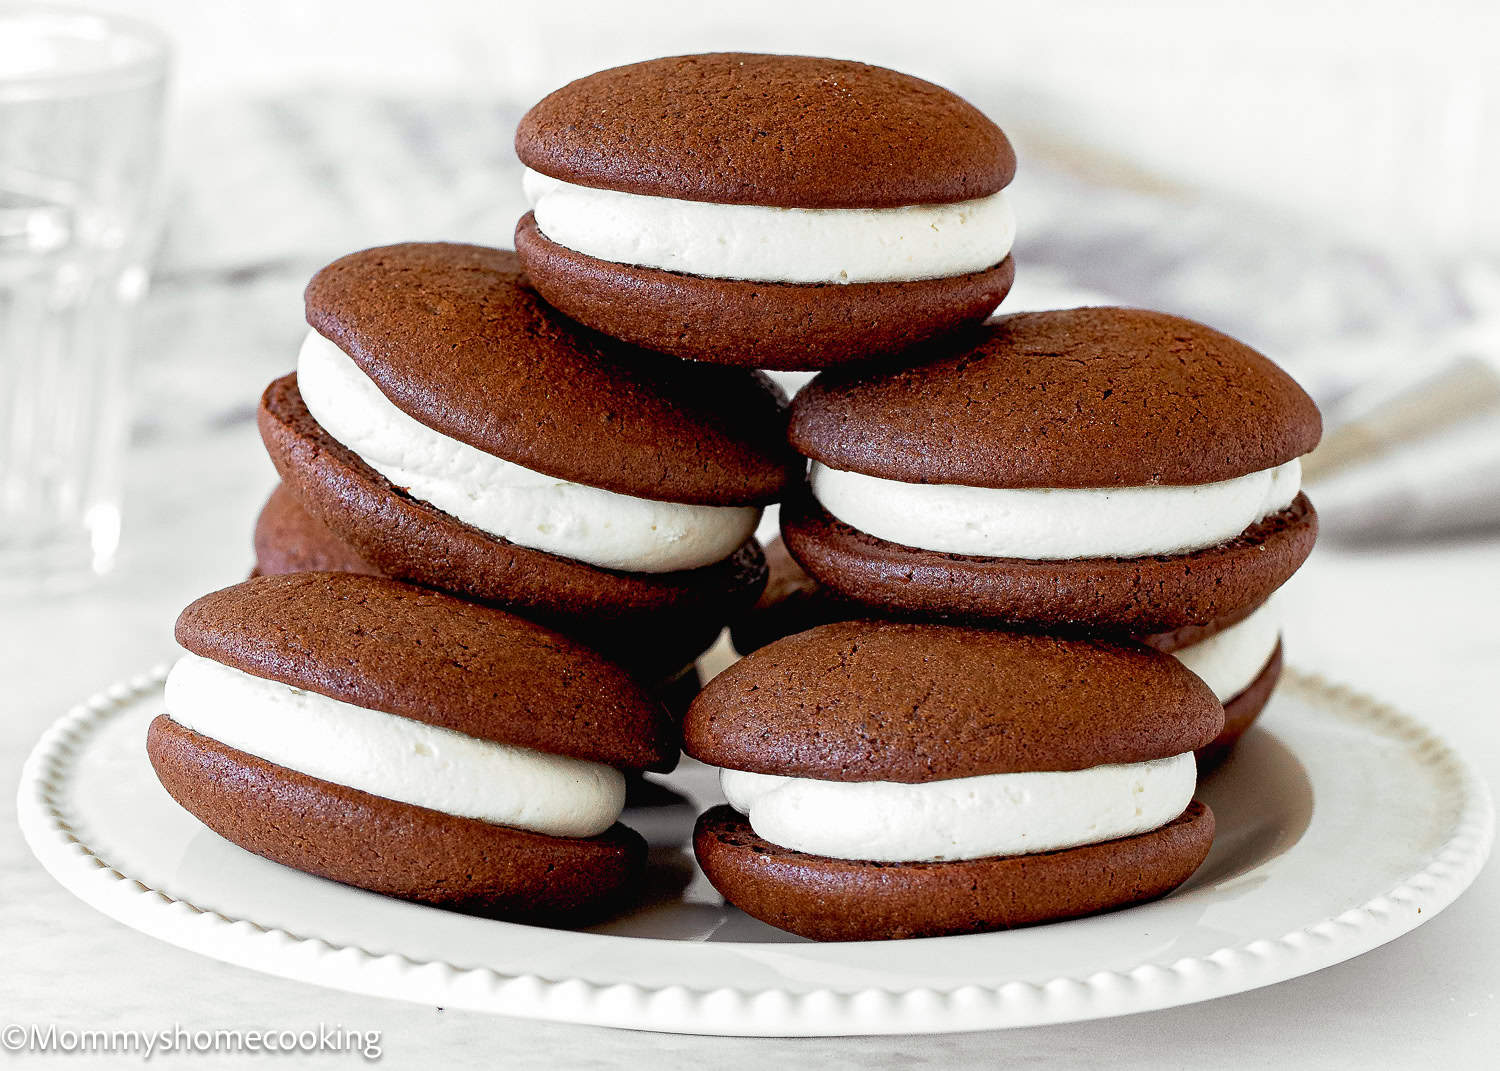 Egg-Free Chocolate Whoopie Pies over a white plate.